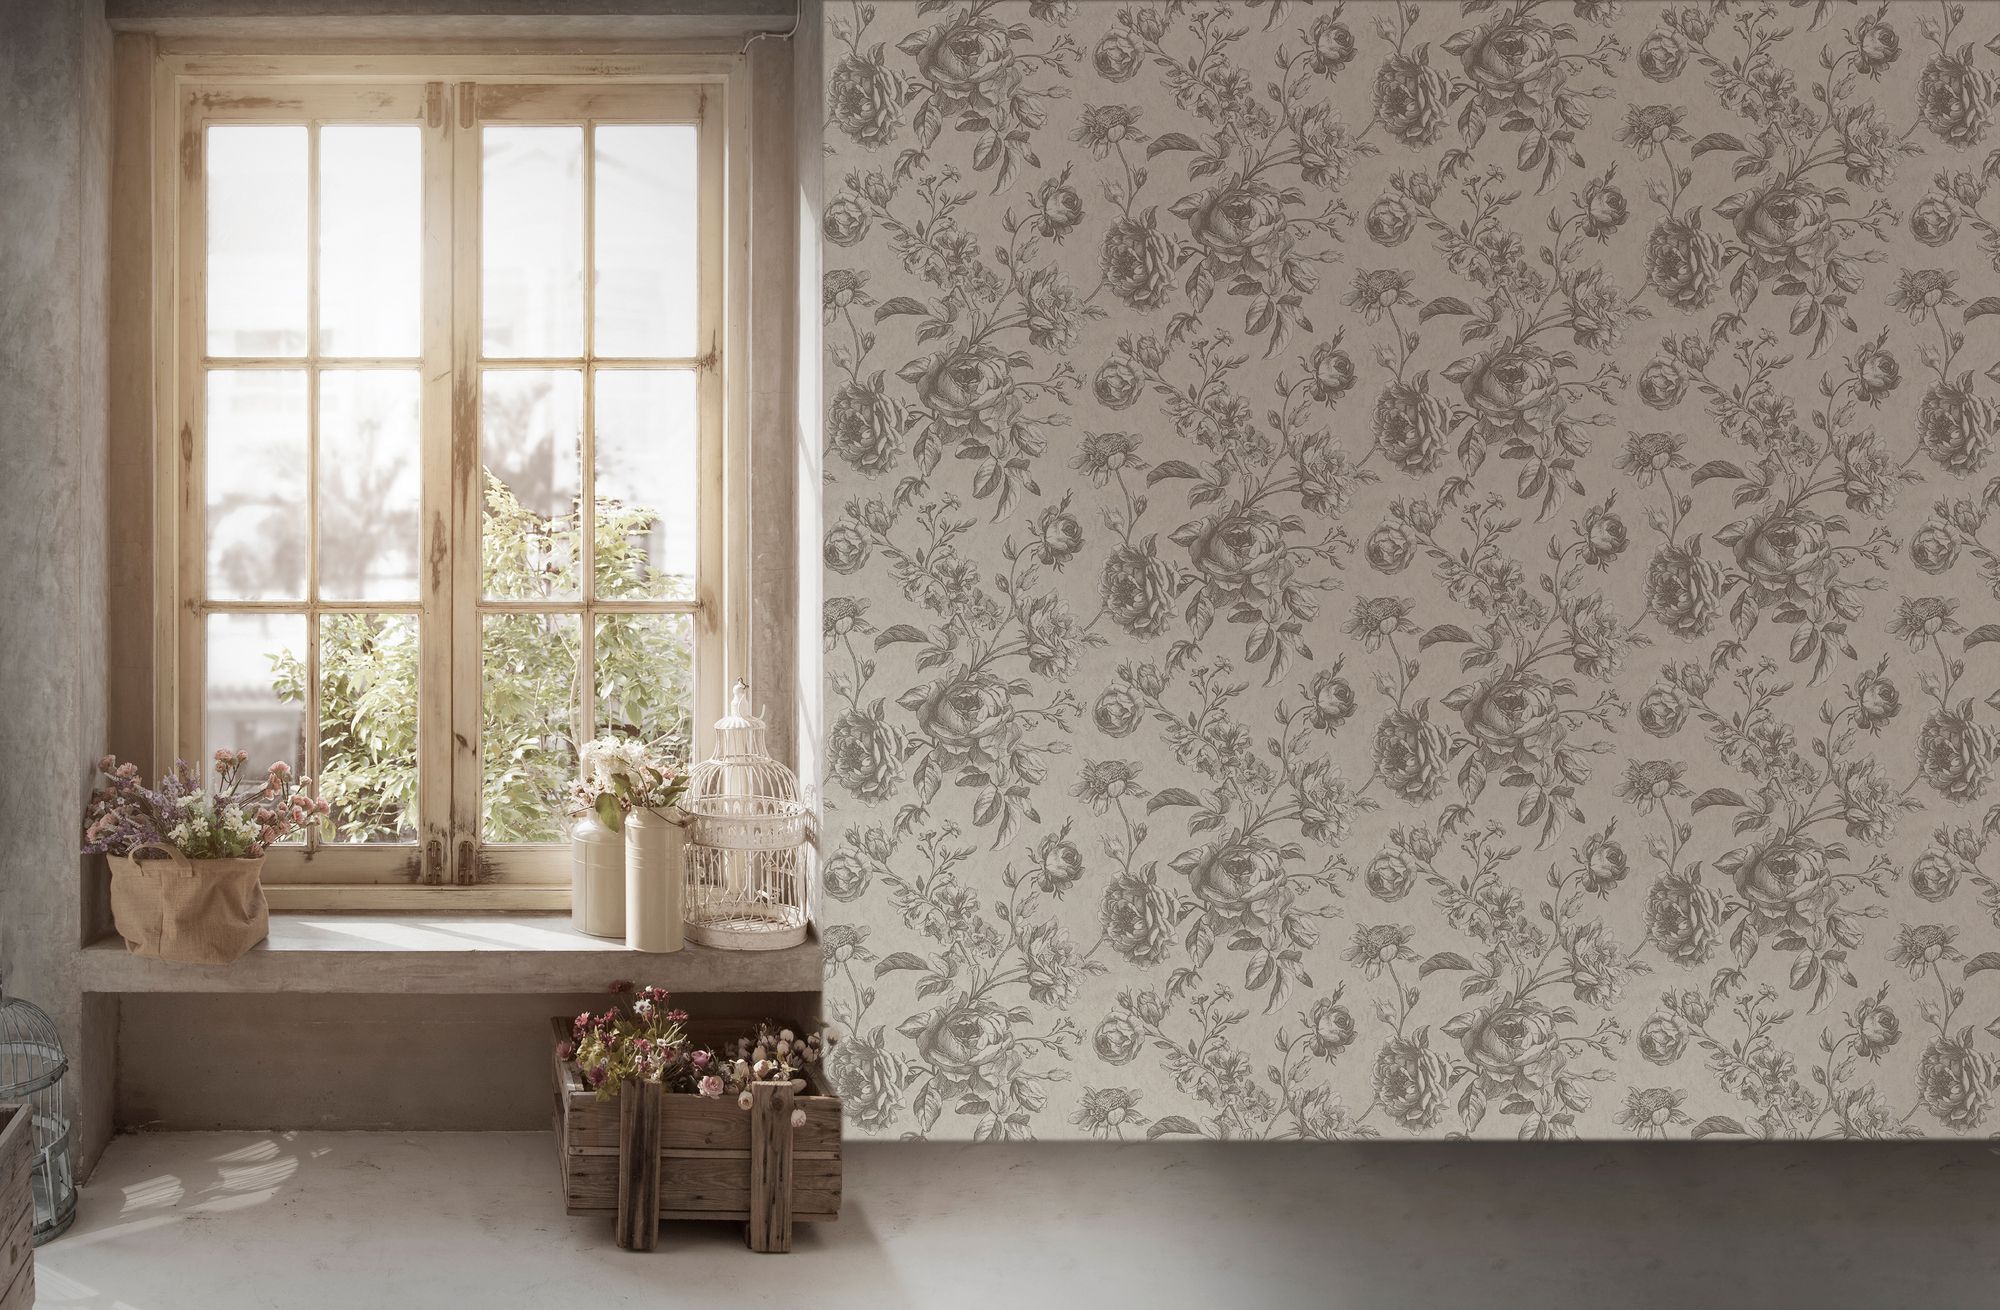 Country house wallpaper black and white AS387001Flowers